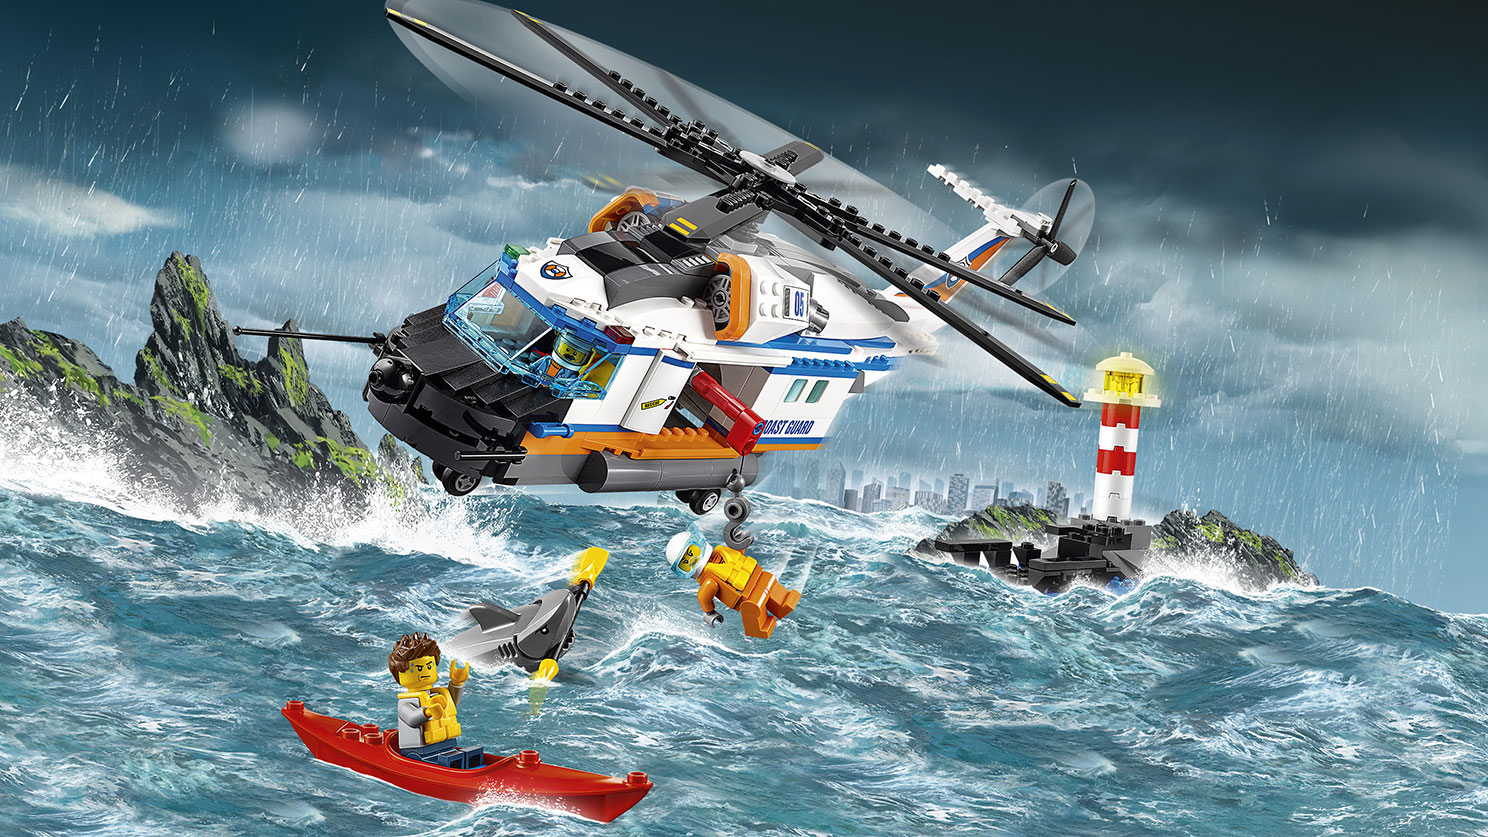 Heavy-duty Rescue Helicopter 60166 - LEGO® City Sets - LEGO.com